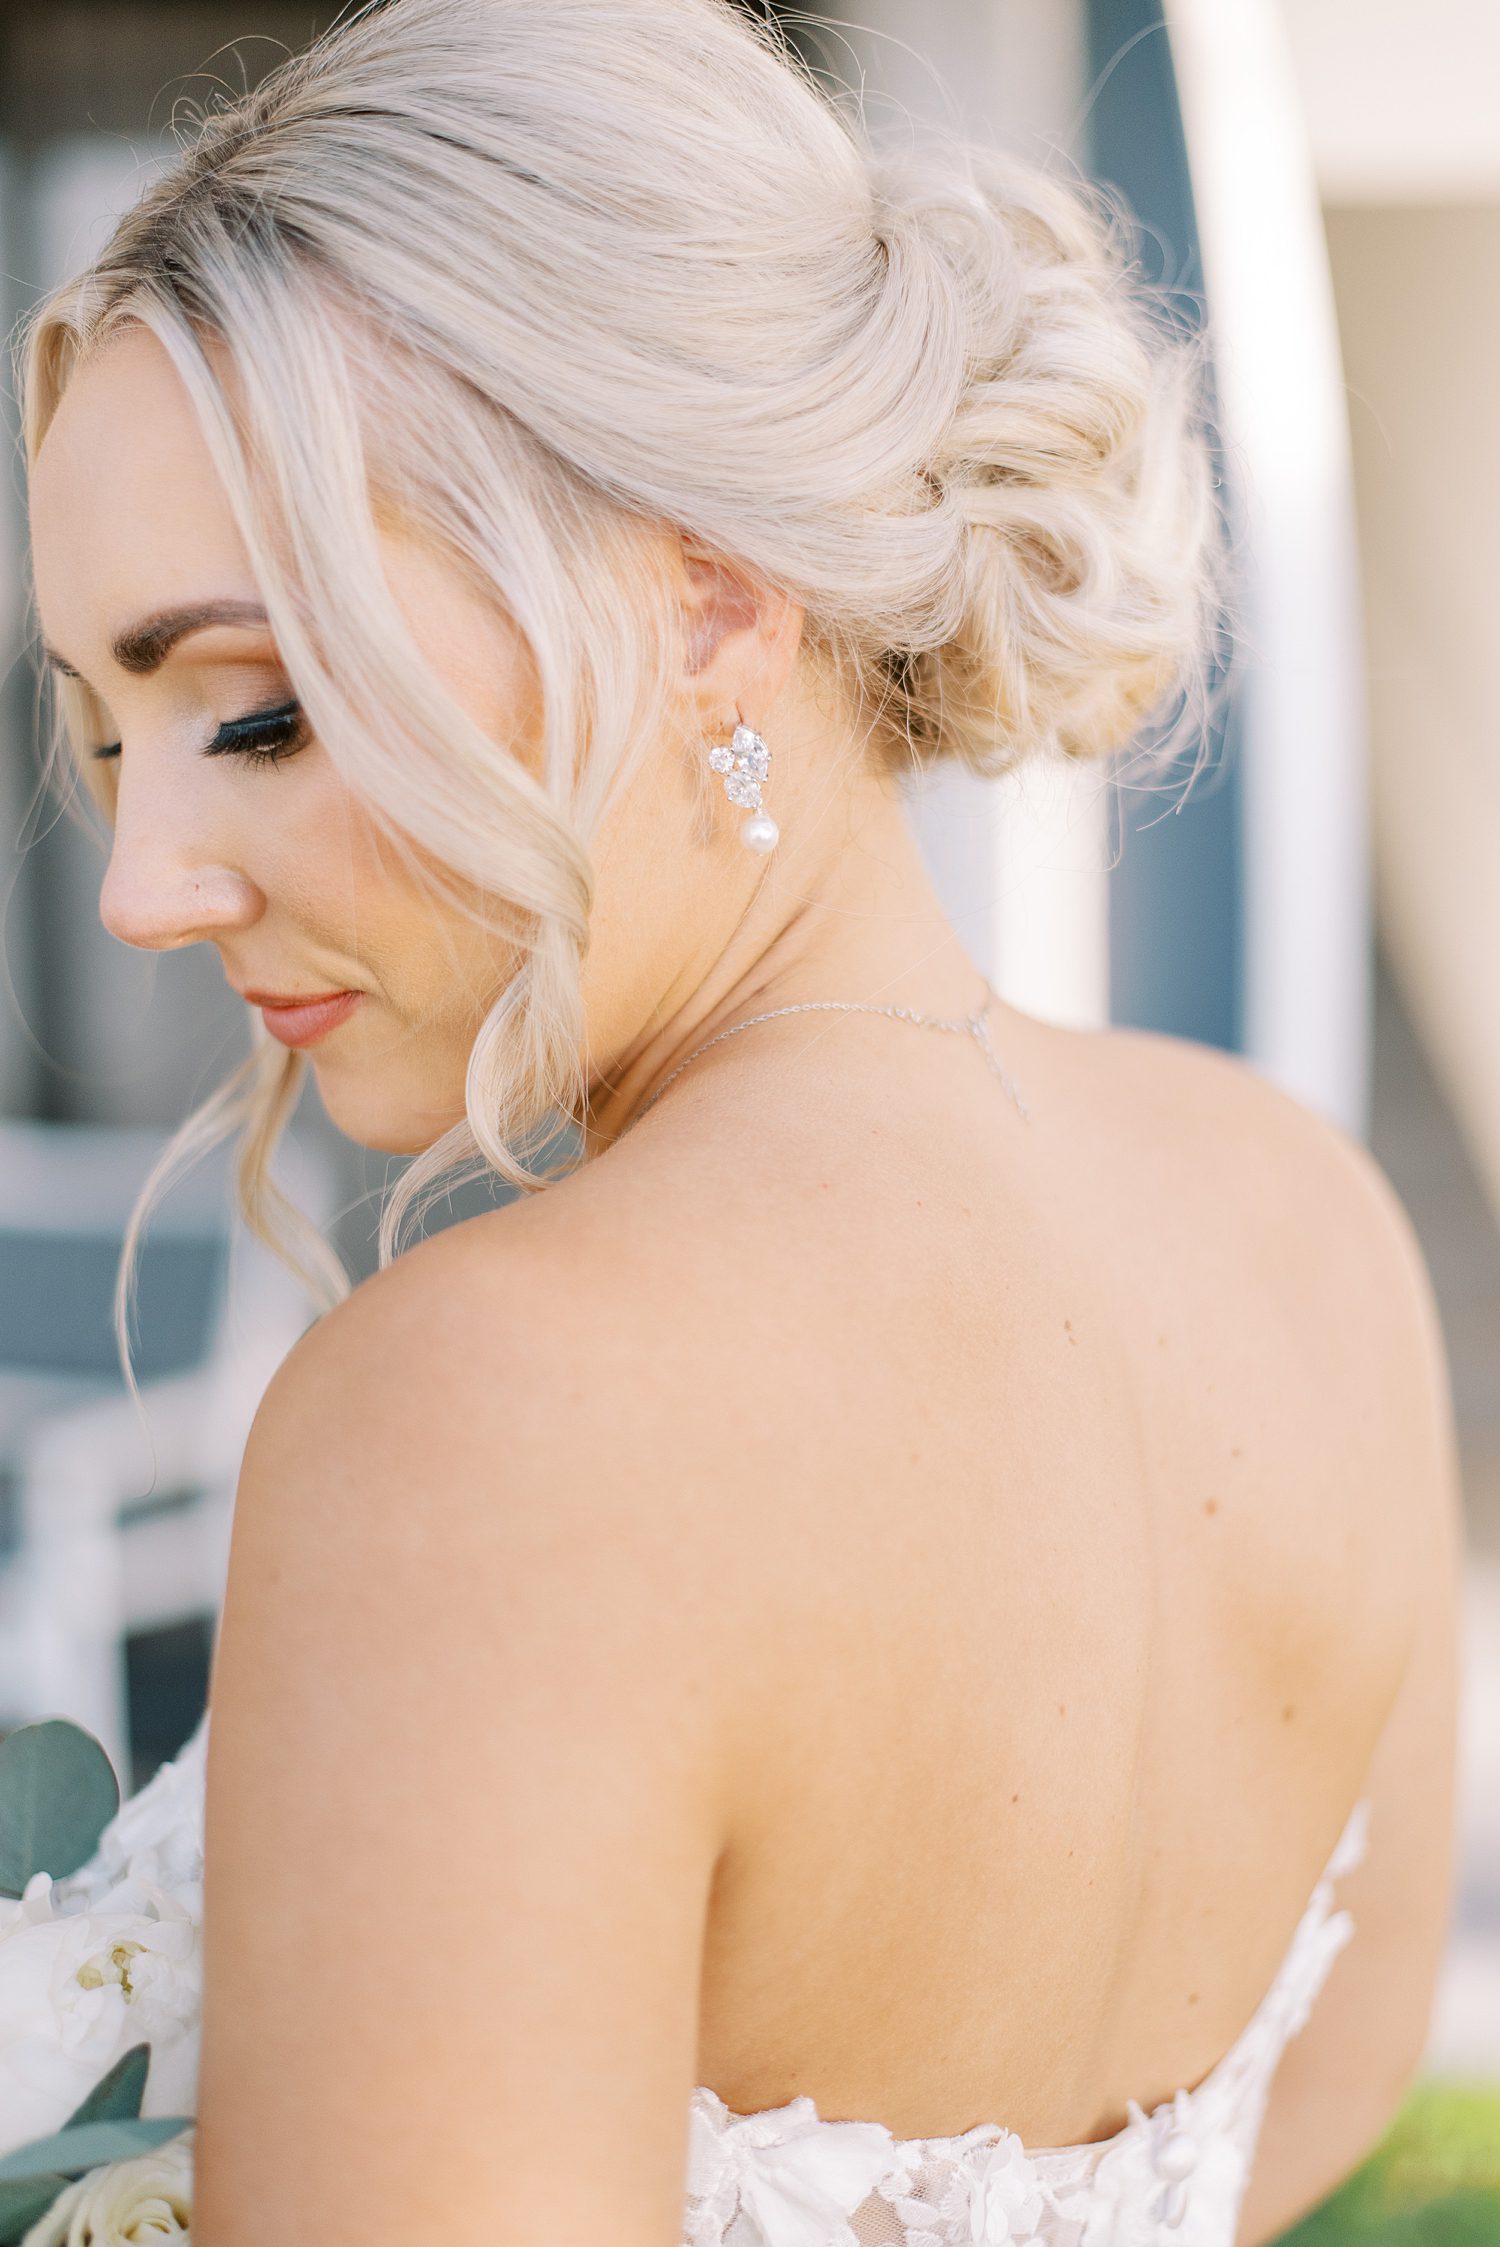 blonde woman in strapless wedding gown looks over shoulder with hair in bun